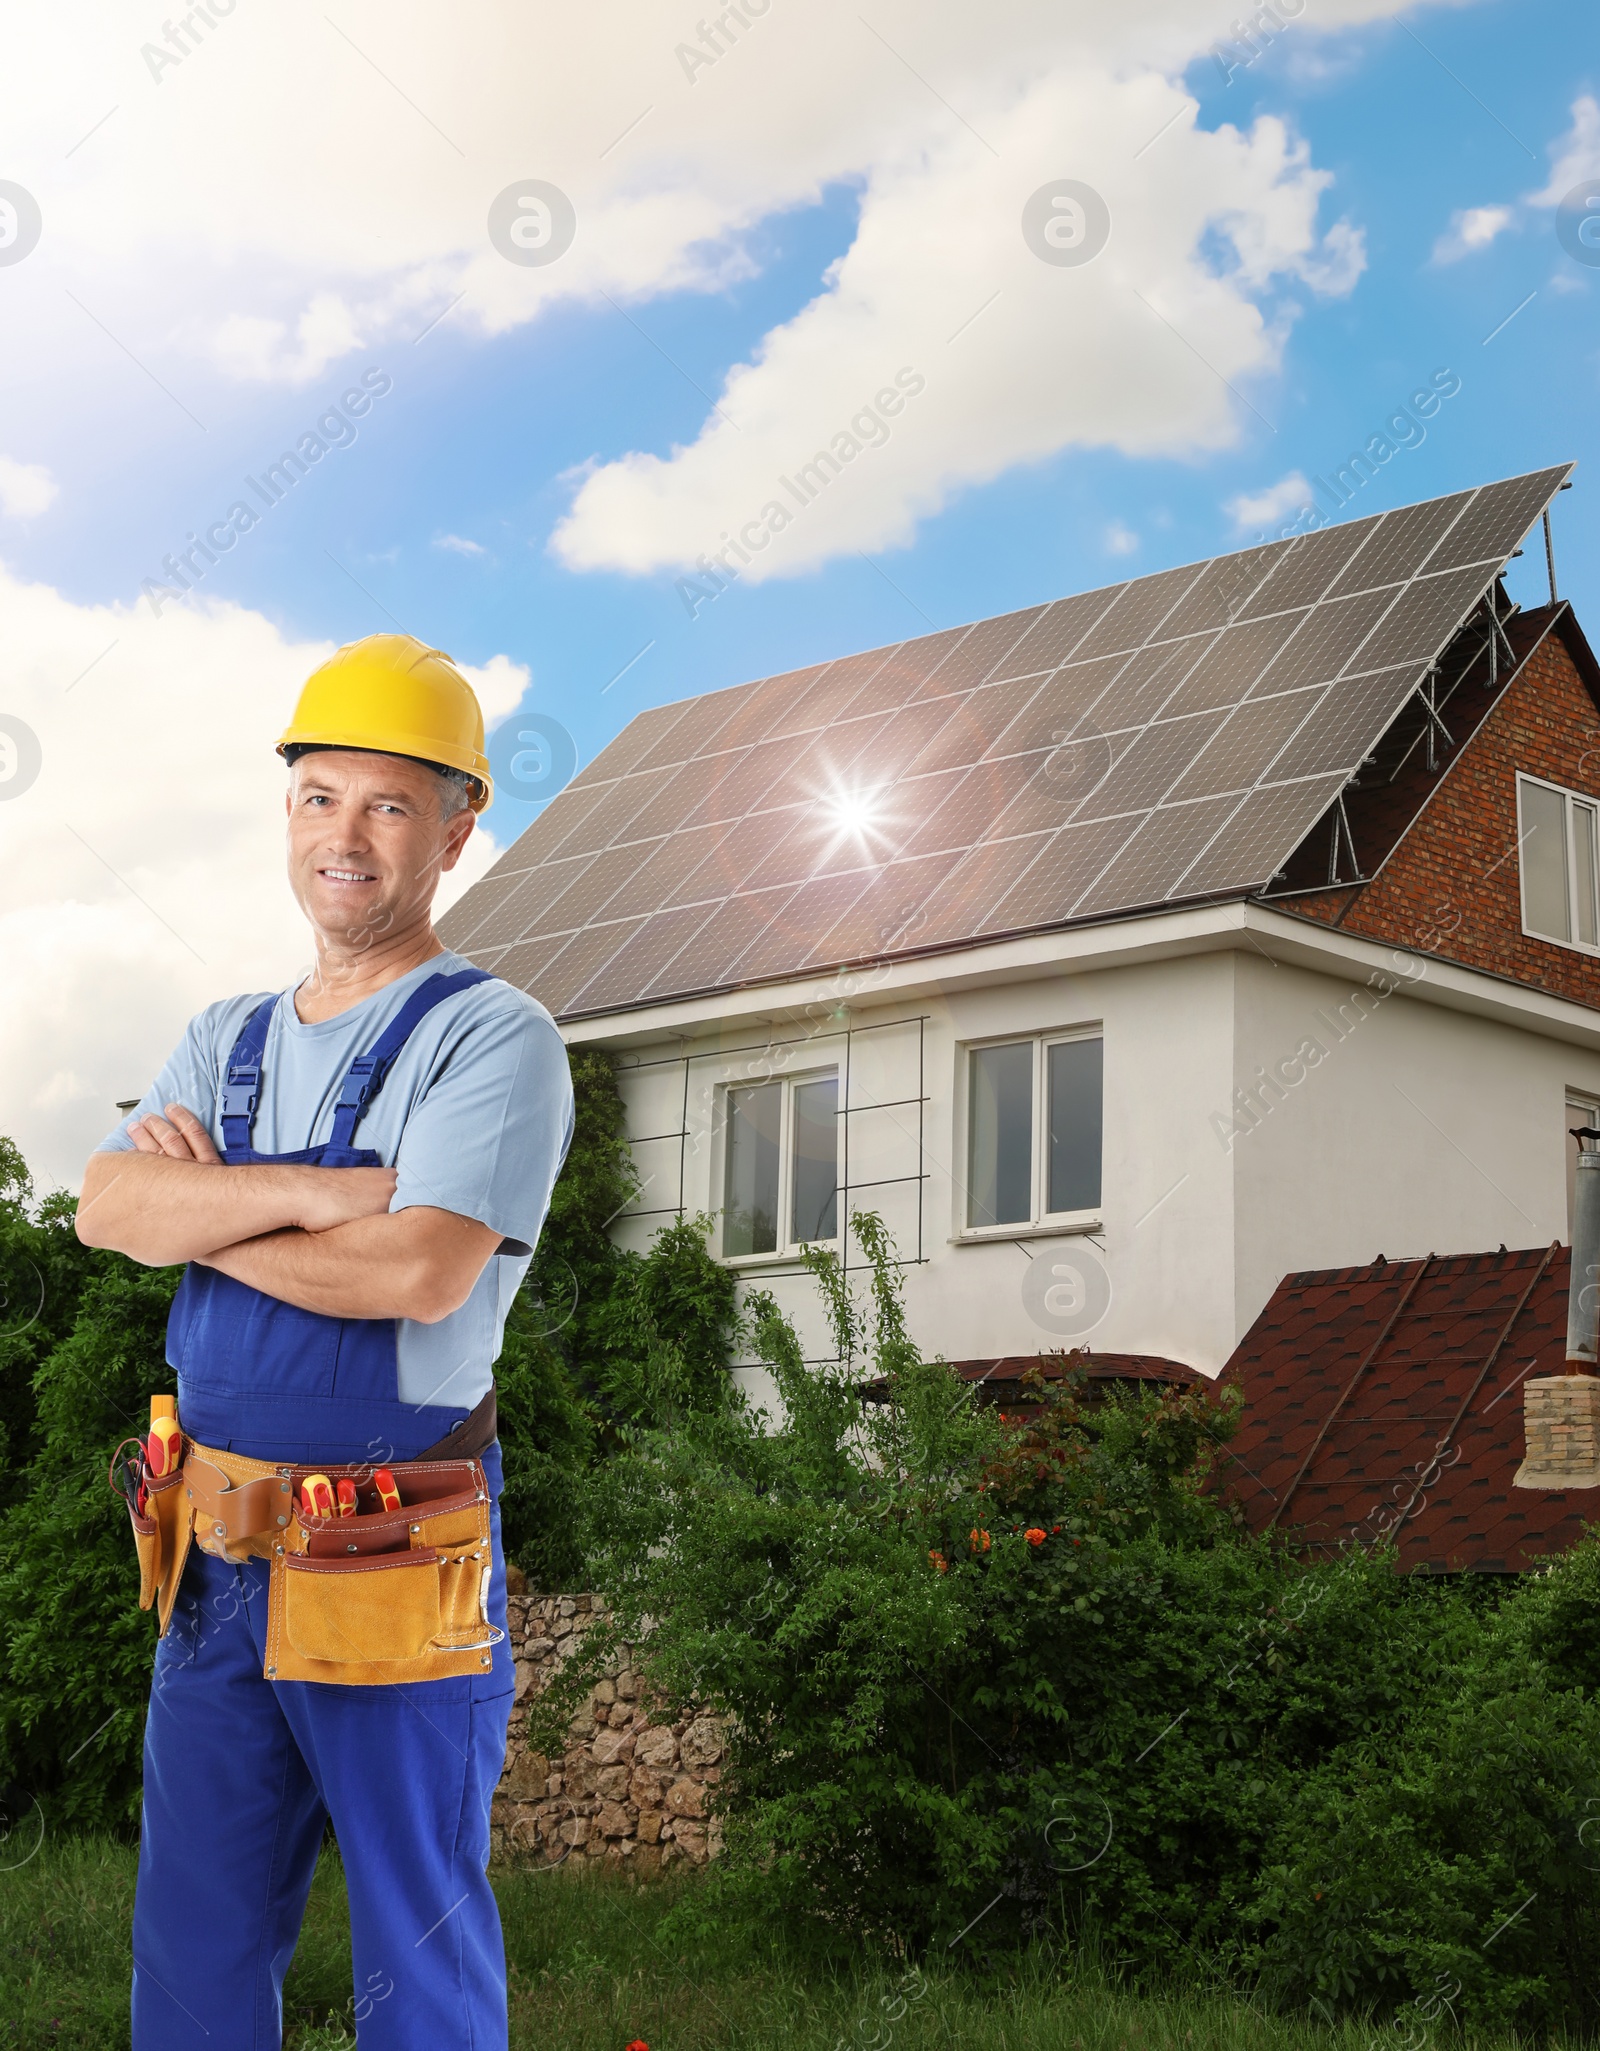 Image of Engineer near house with installed solar panels. Alternative energy source